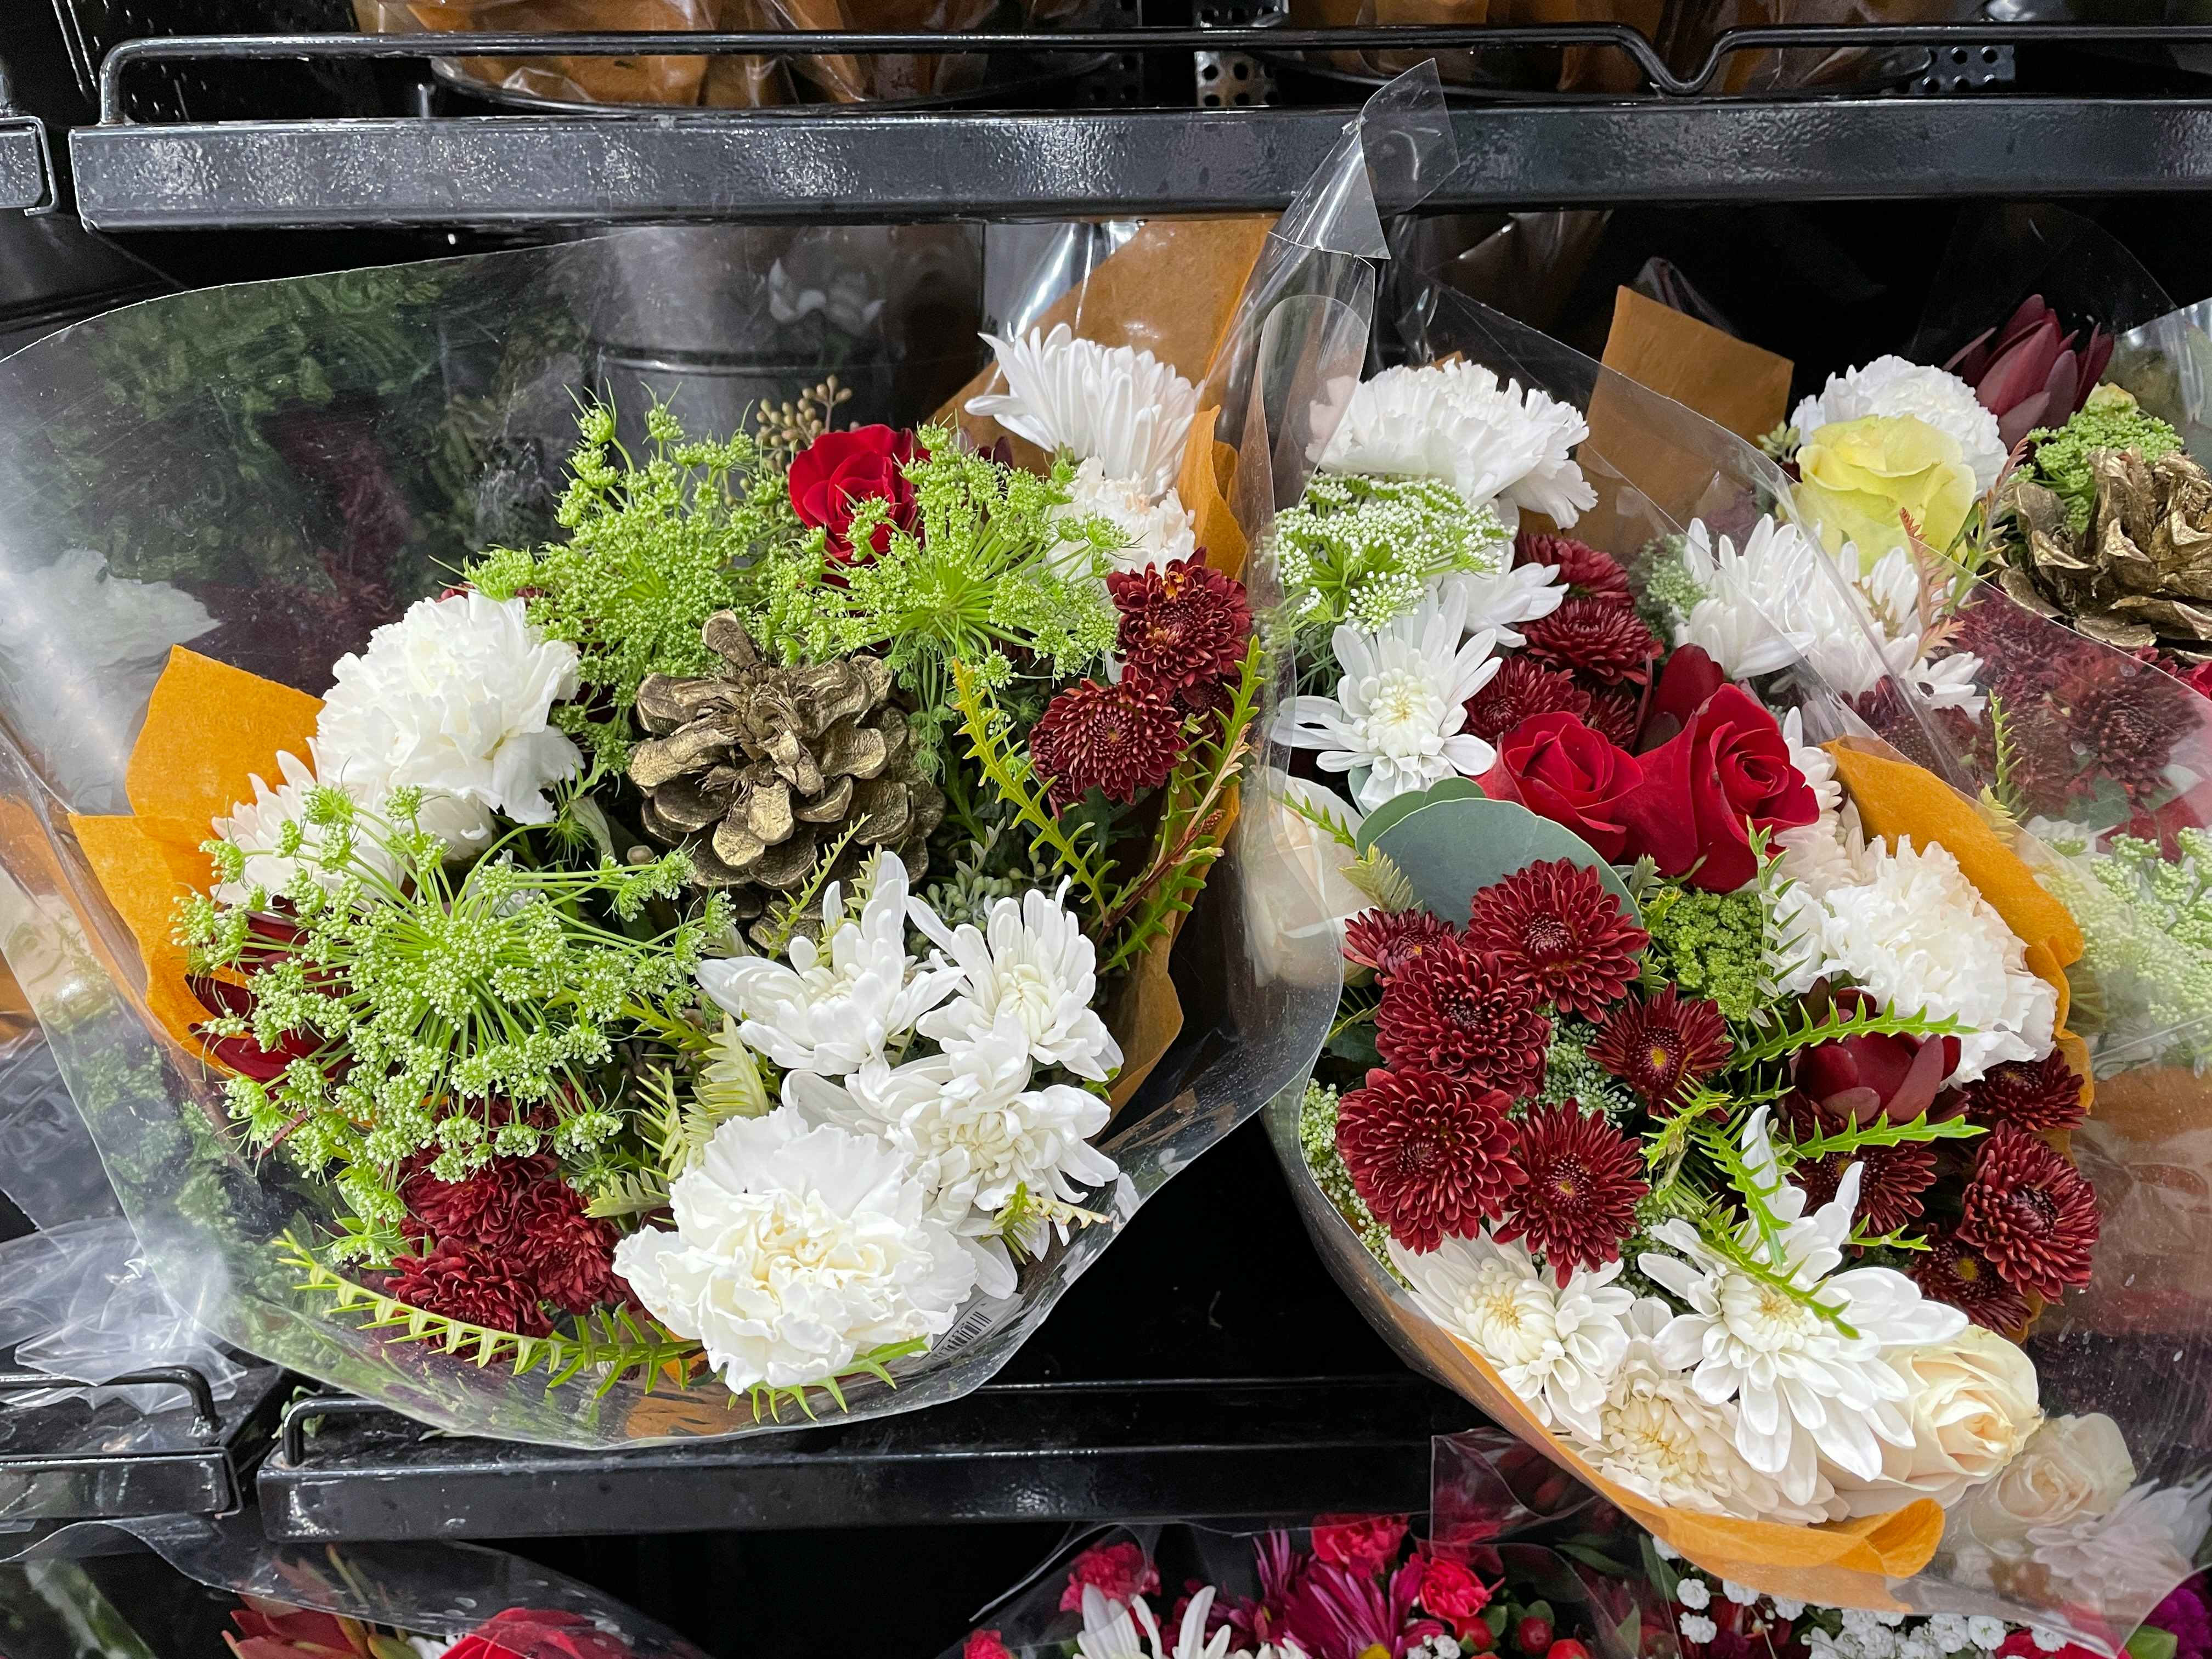 A close up on some bouquets of flowers on a shelf in Costco